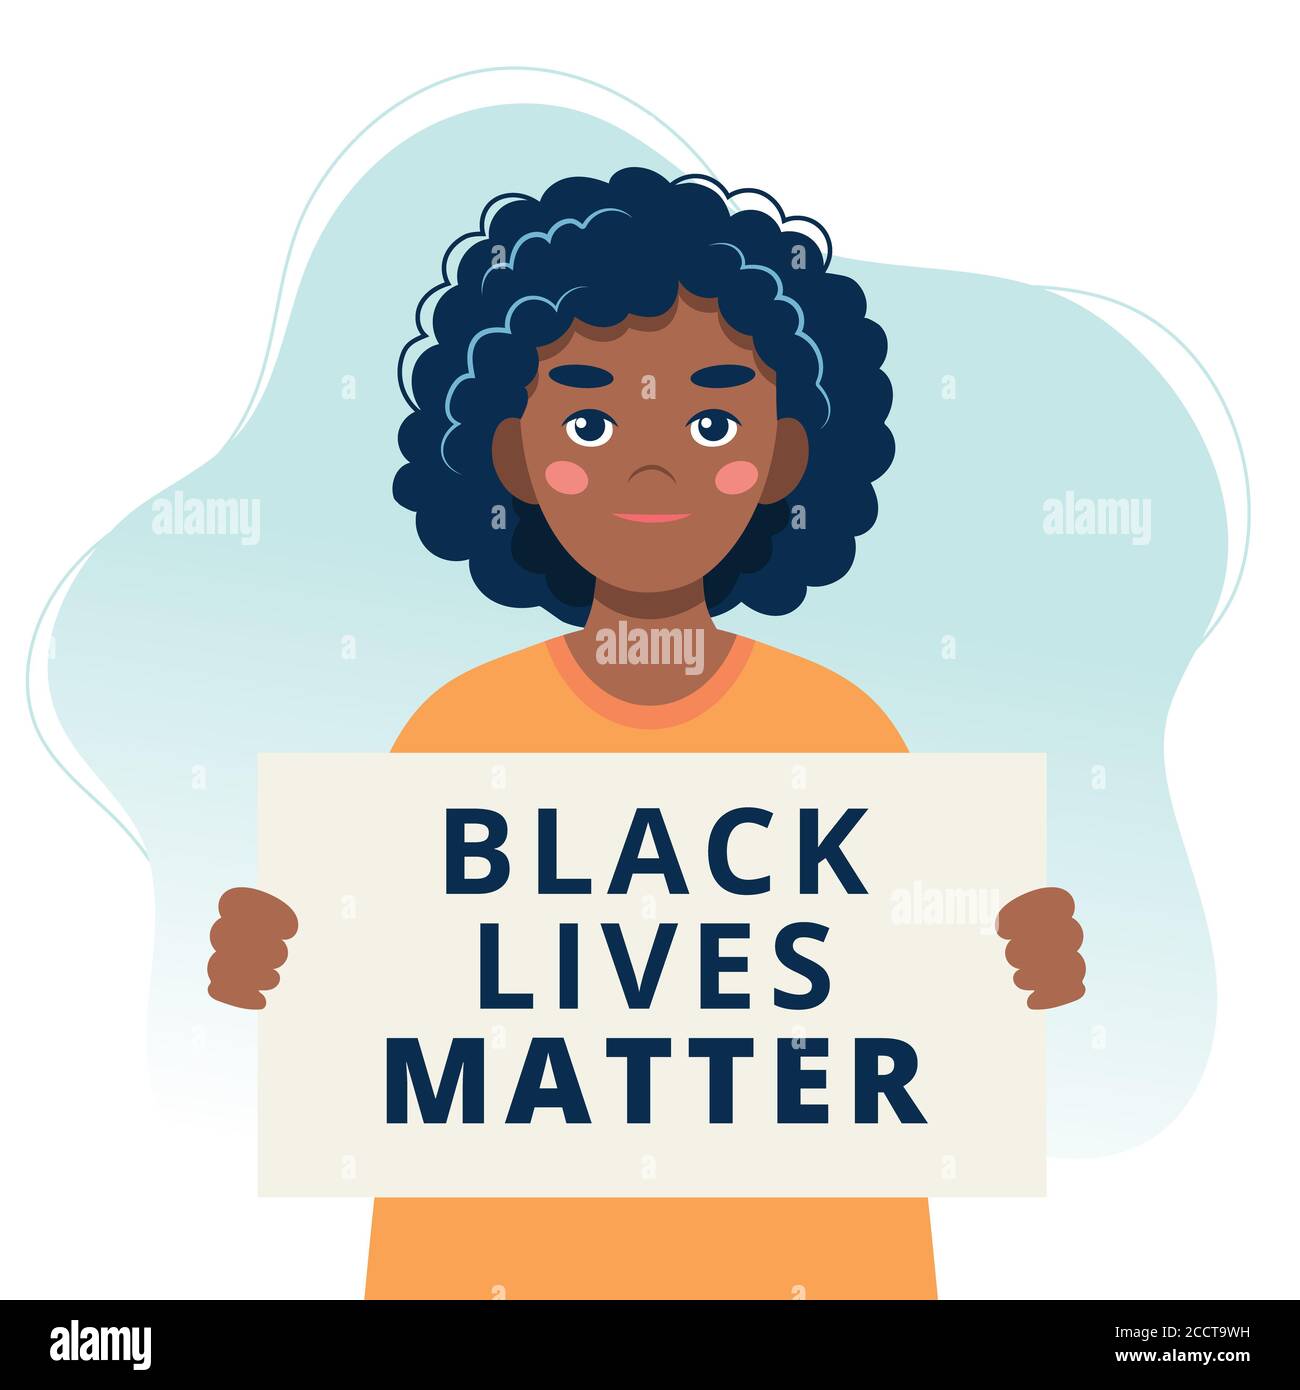 Black lives matter. Black woman protestor holding a poster. Racial inequality concept. illustration in flat style Stock Photo